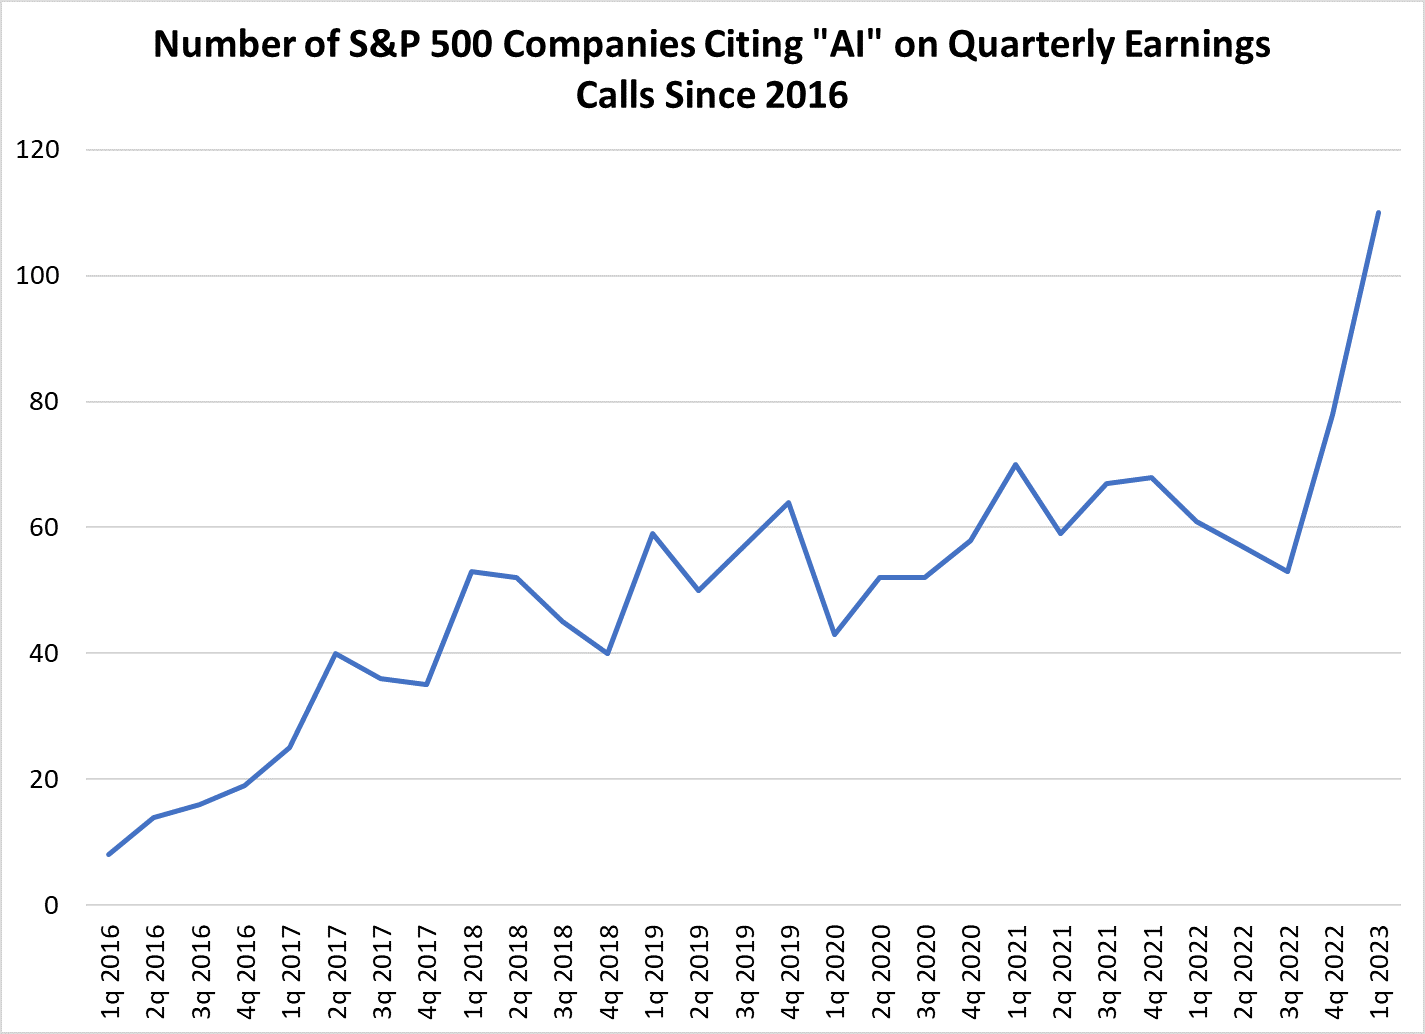 Number of S&P C500 Companies Citing AI on Quarterly Earnings since 2016